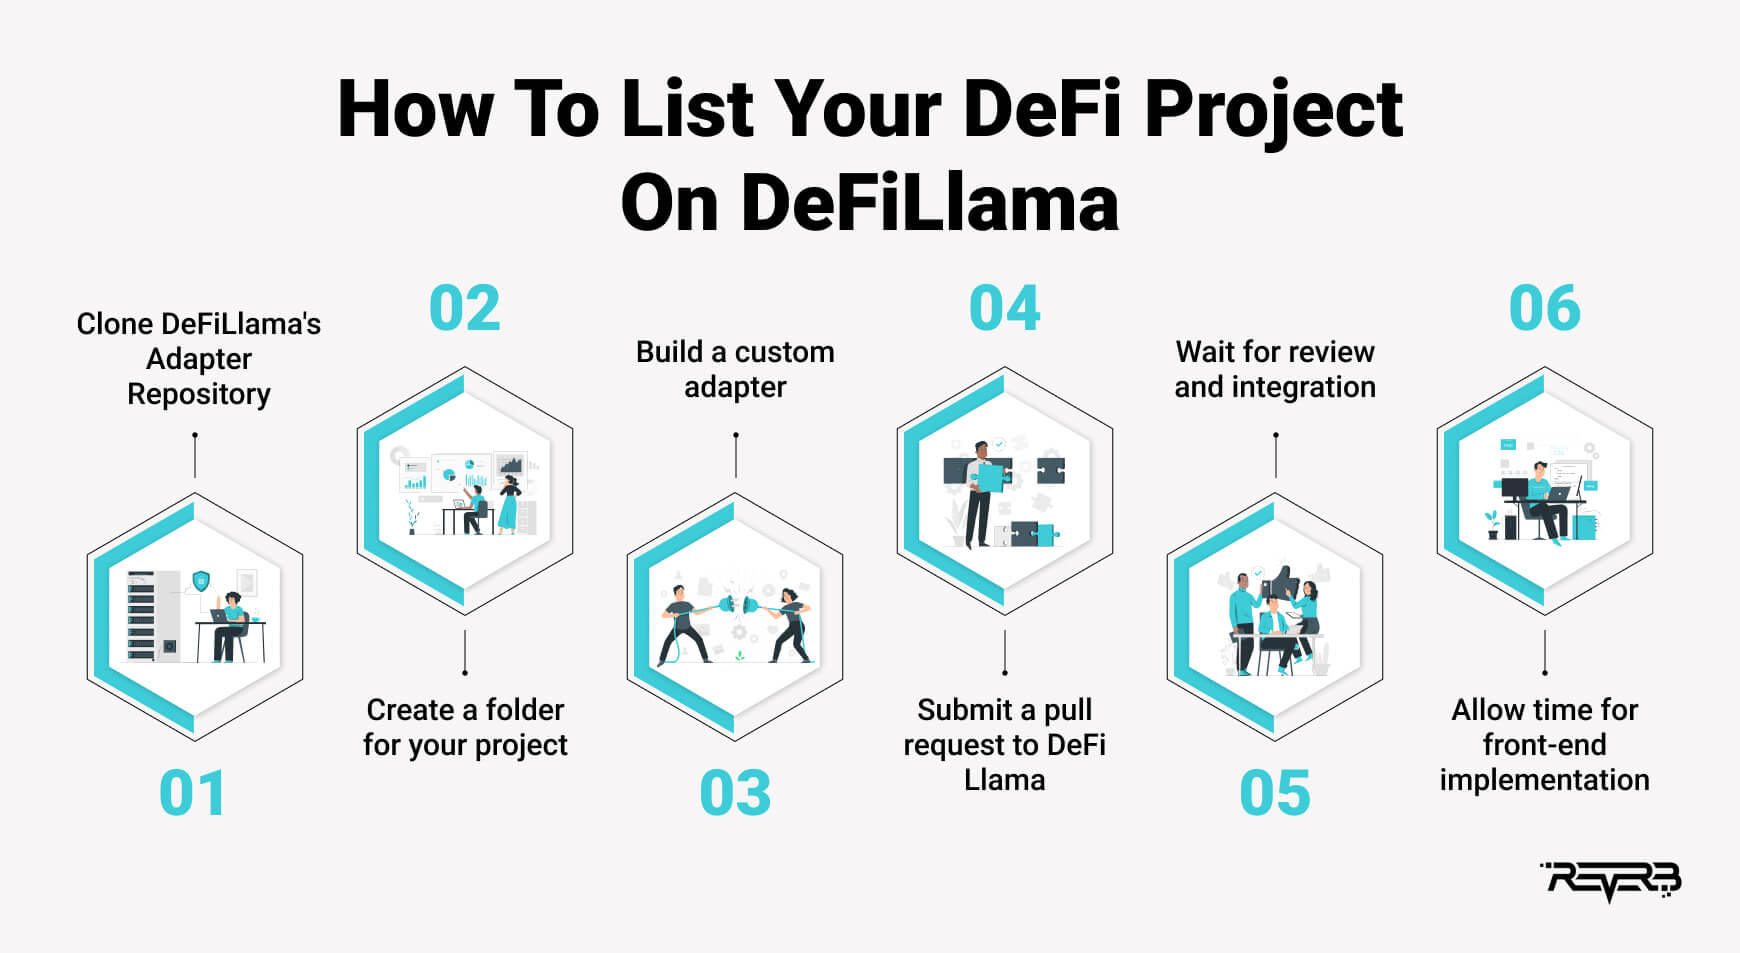 How To List Your DeFi Project On DeFiLlama